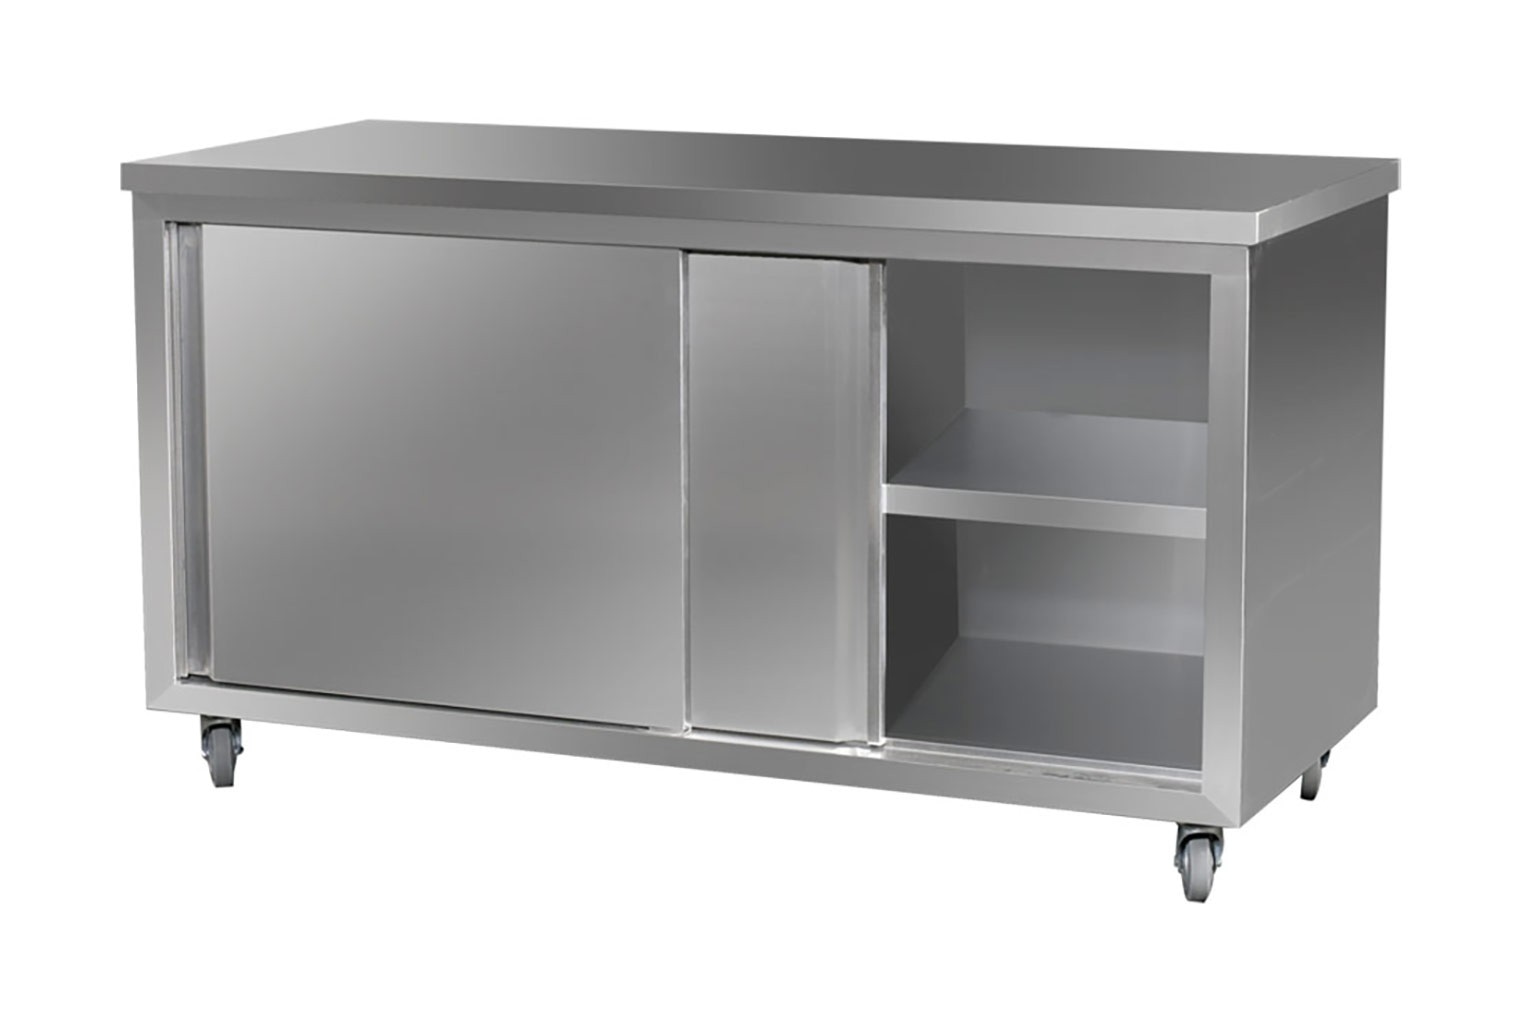 Stainless Cabinet, 1600 X 700 x 900mm high,